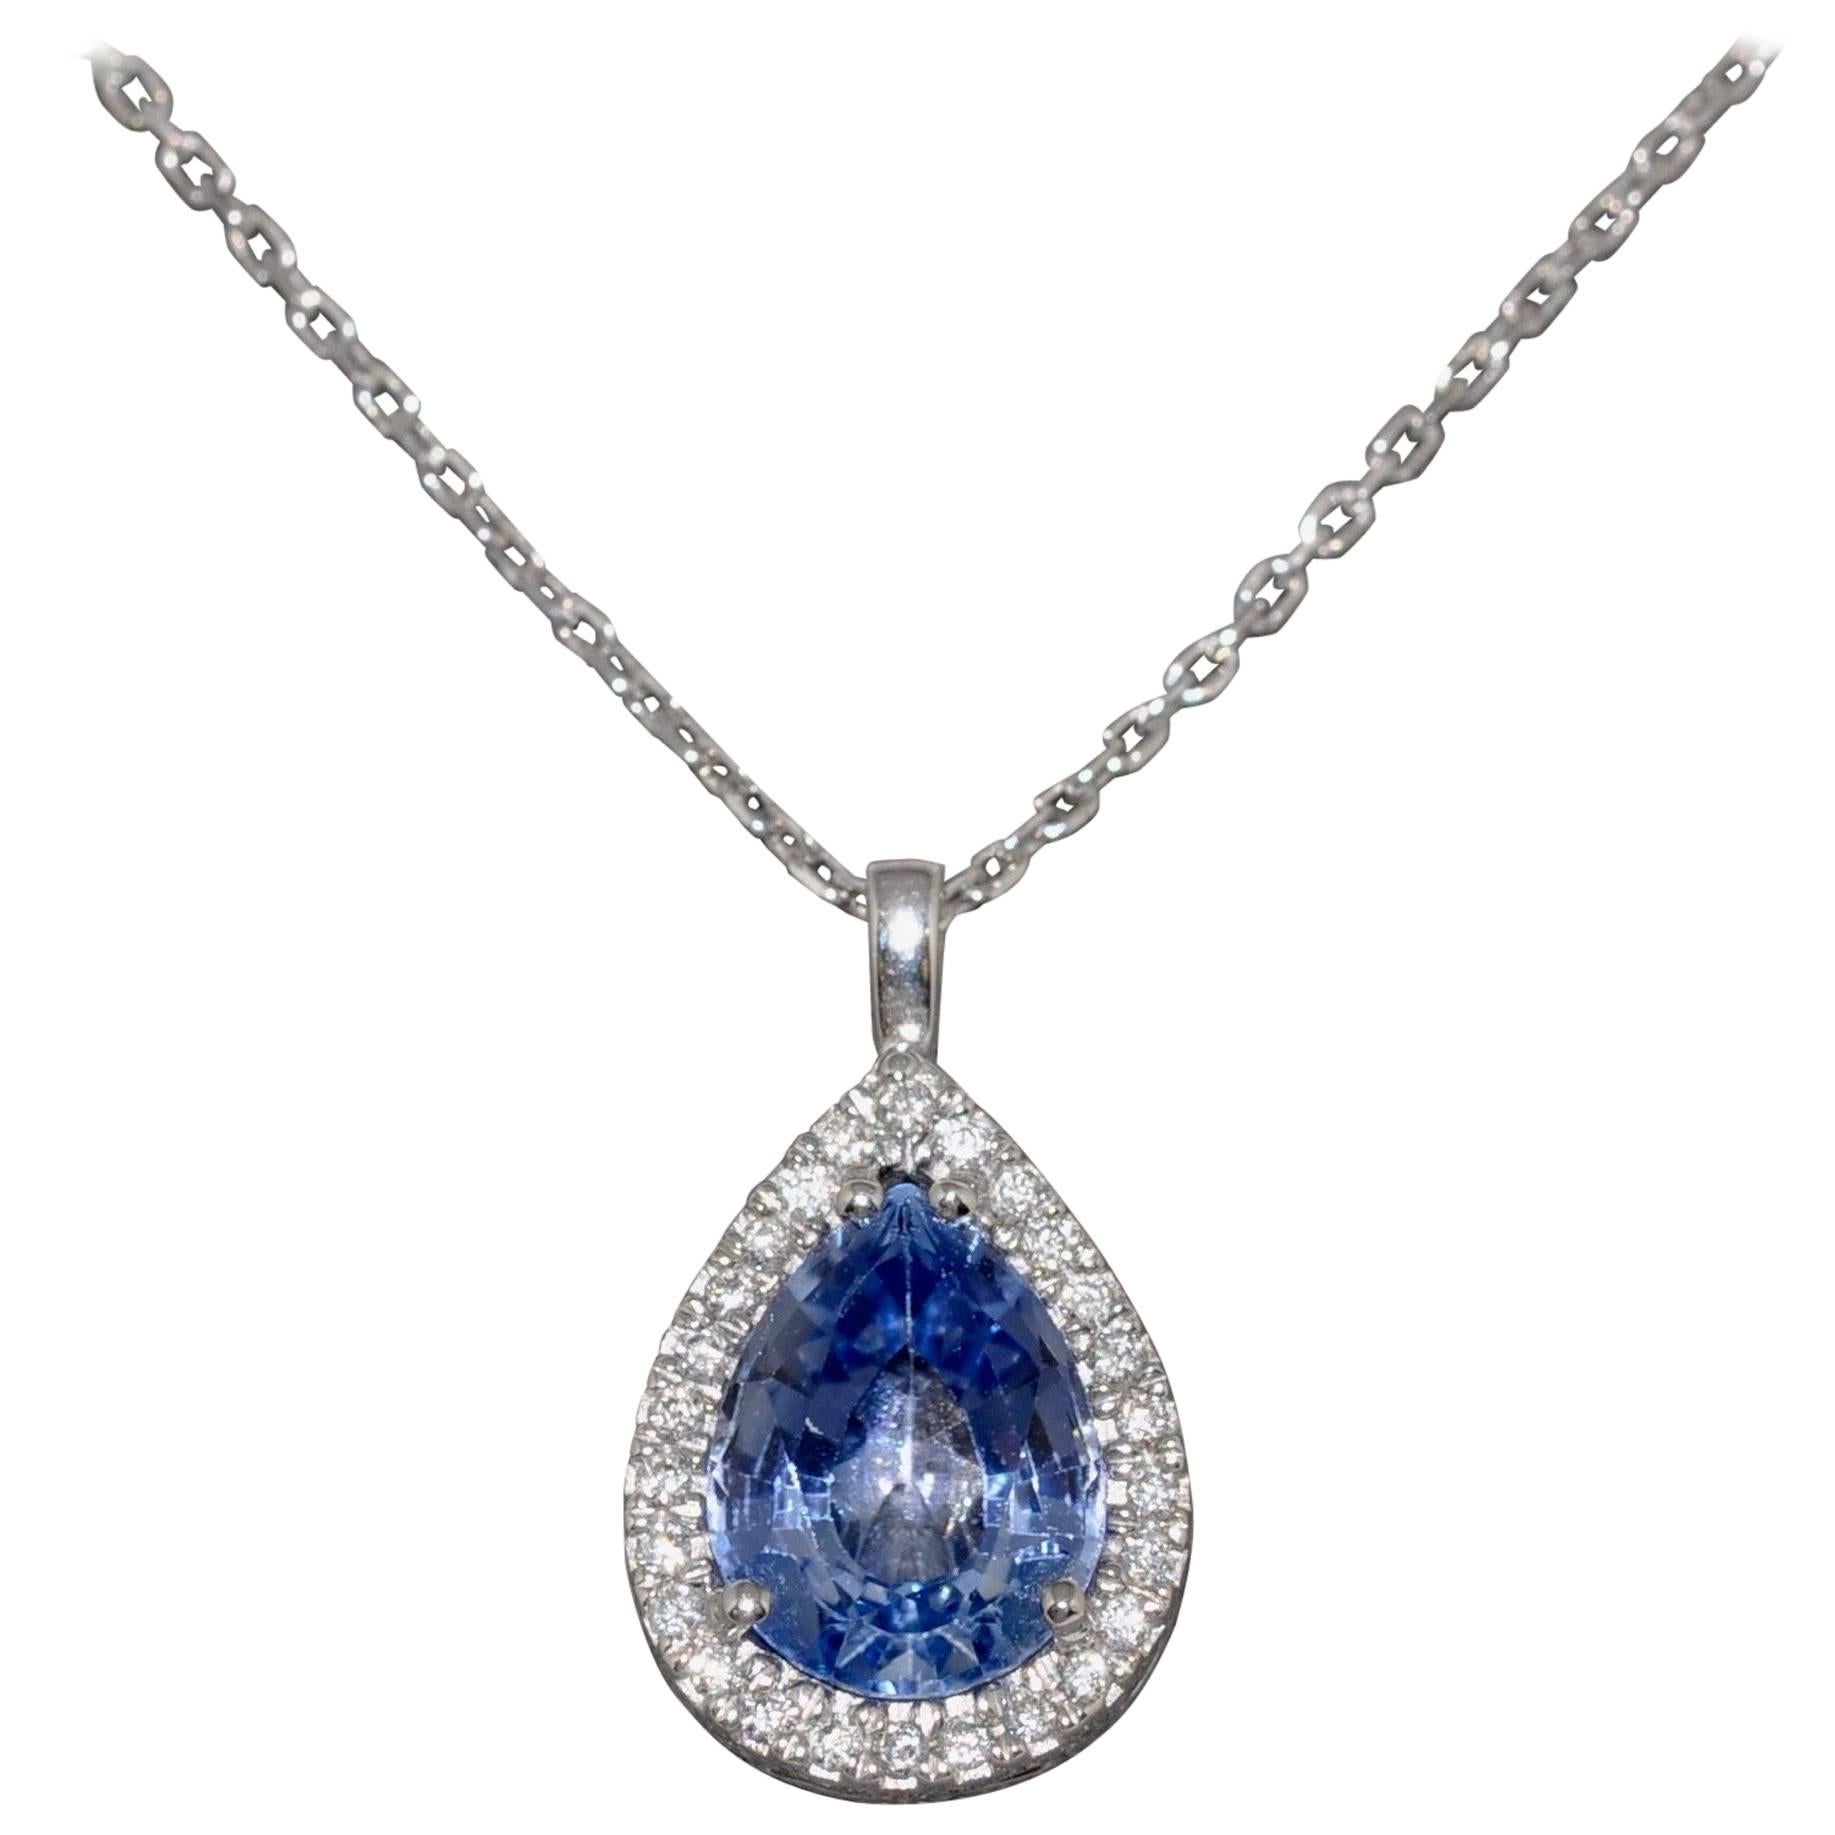 Sapphire ct 1.30 and White Diamonds ct 0.10 on White Gold 18K Pendant Necklace